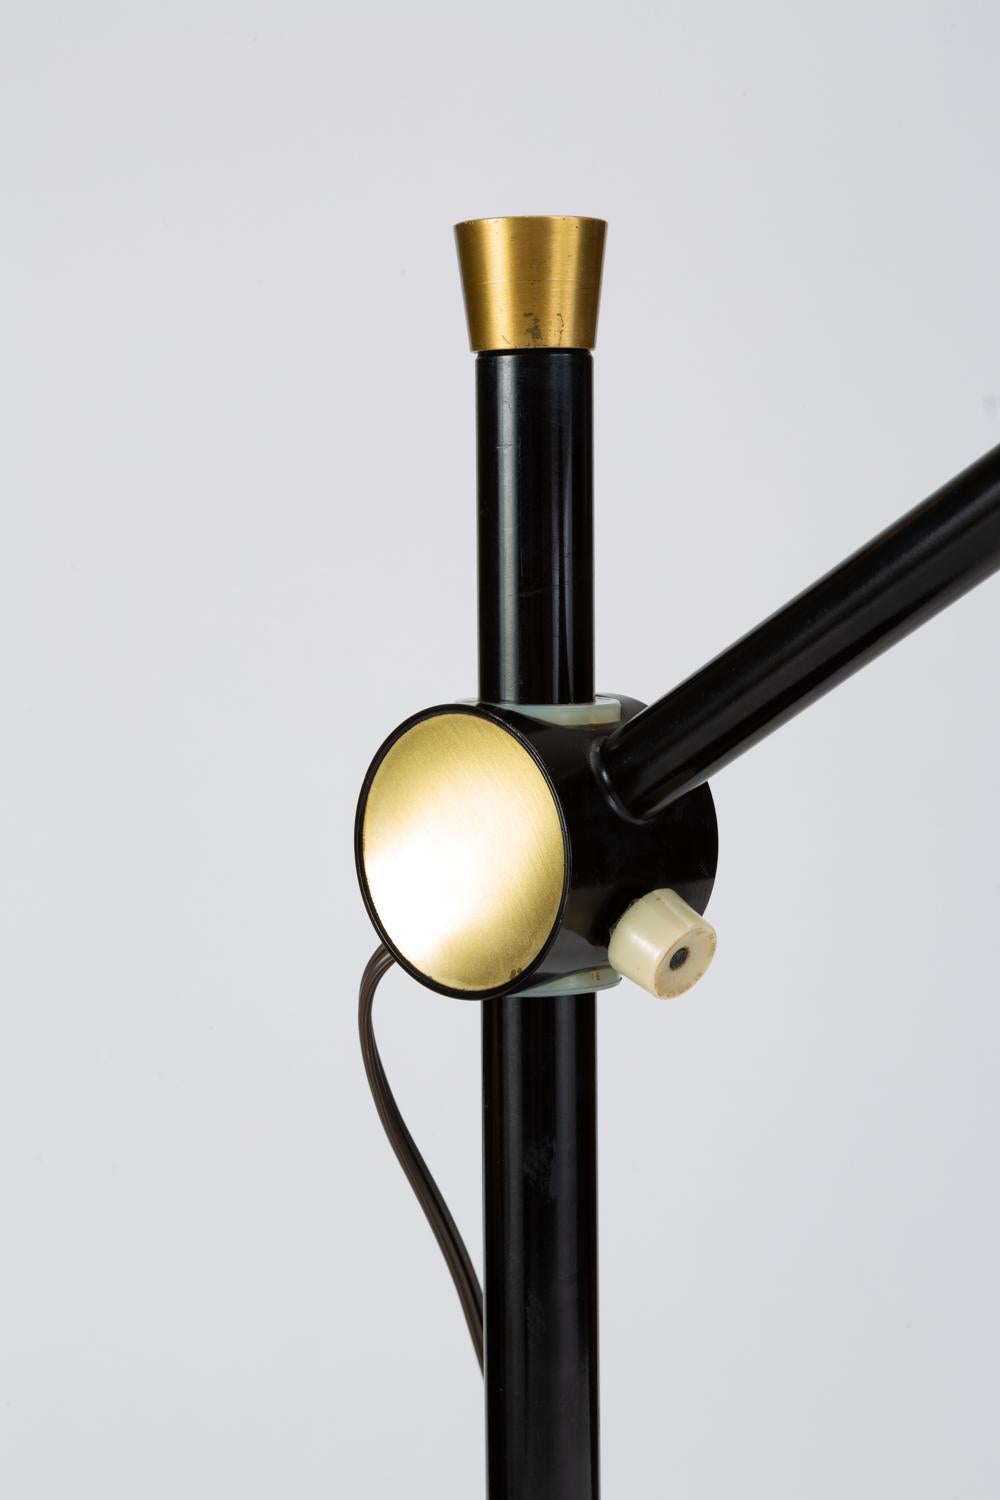 Black-Enameled Desk Lamp with Brass Accents by Dazor 4